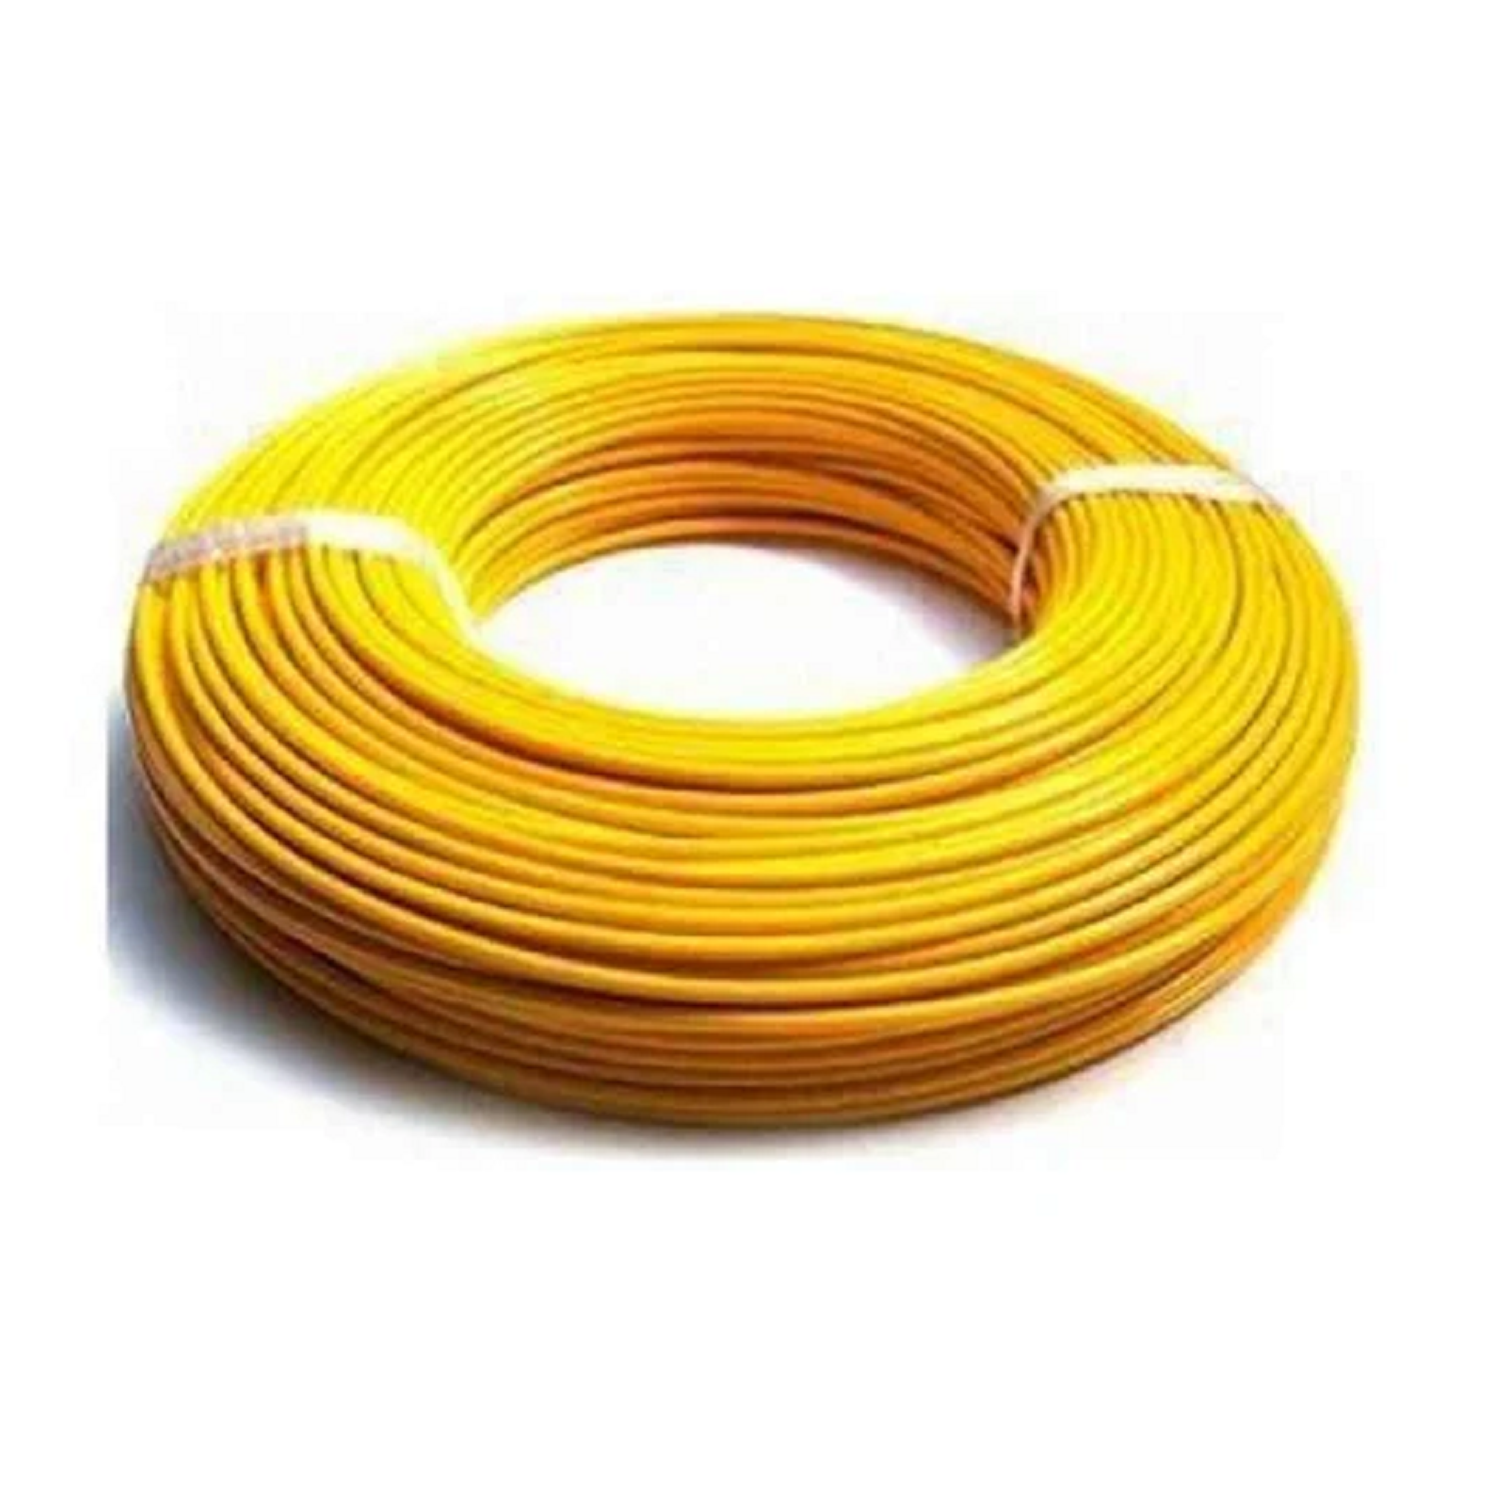 4.0 Sqmm RR FR Single Core Copper Wire (180 Mtr) With PVC Insulated for Domestic 38 Industrial Uses